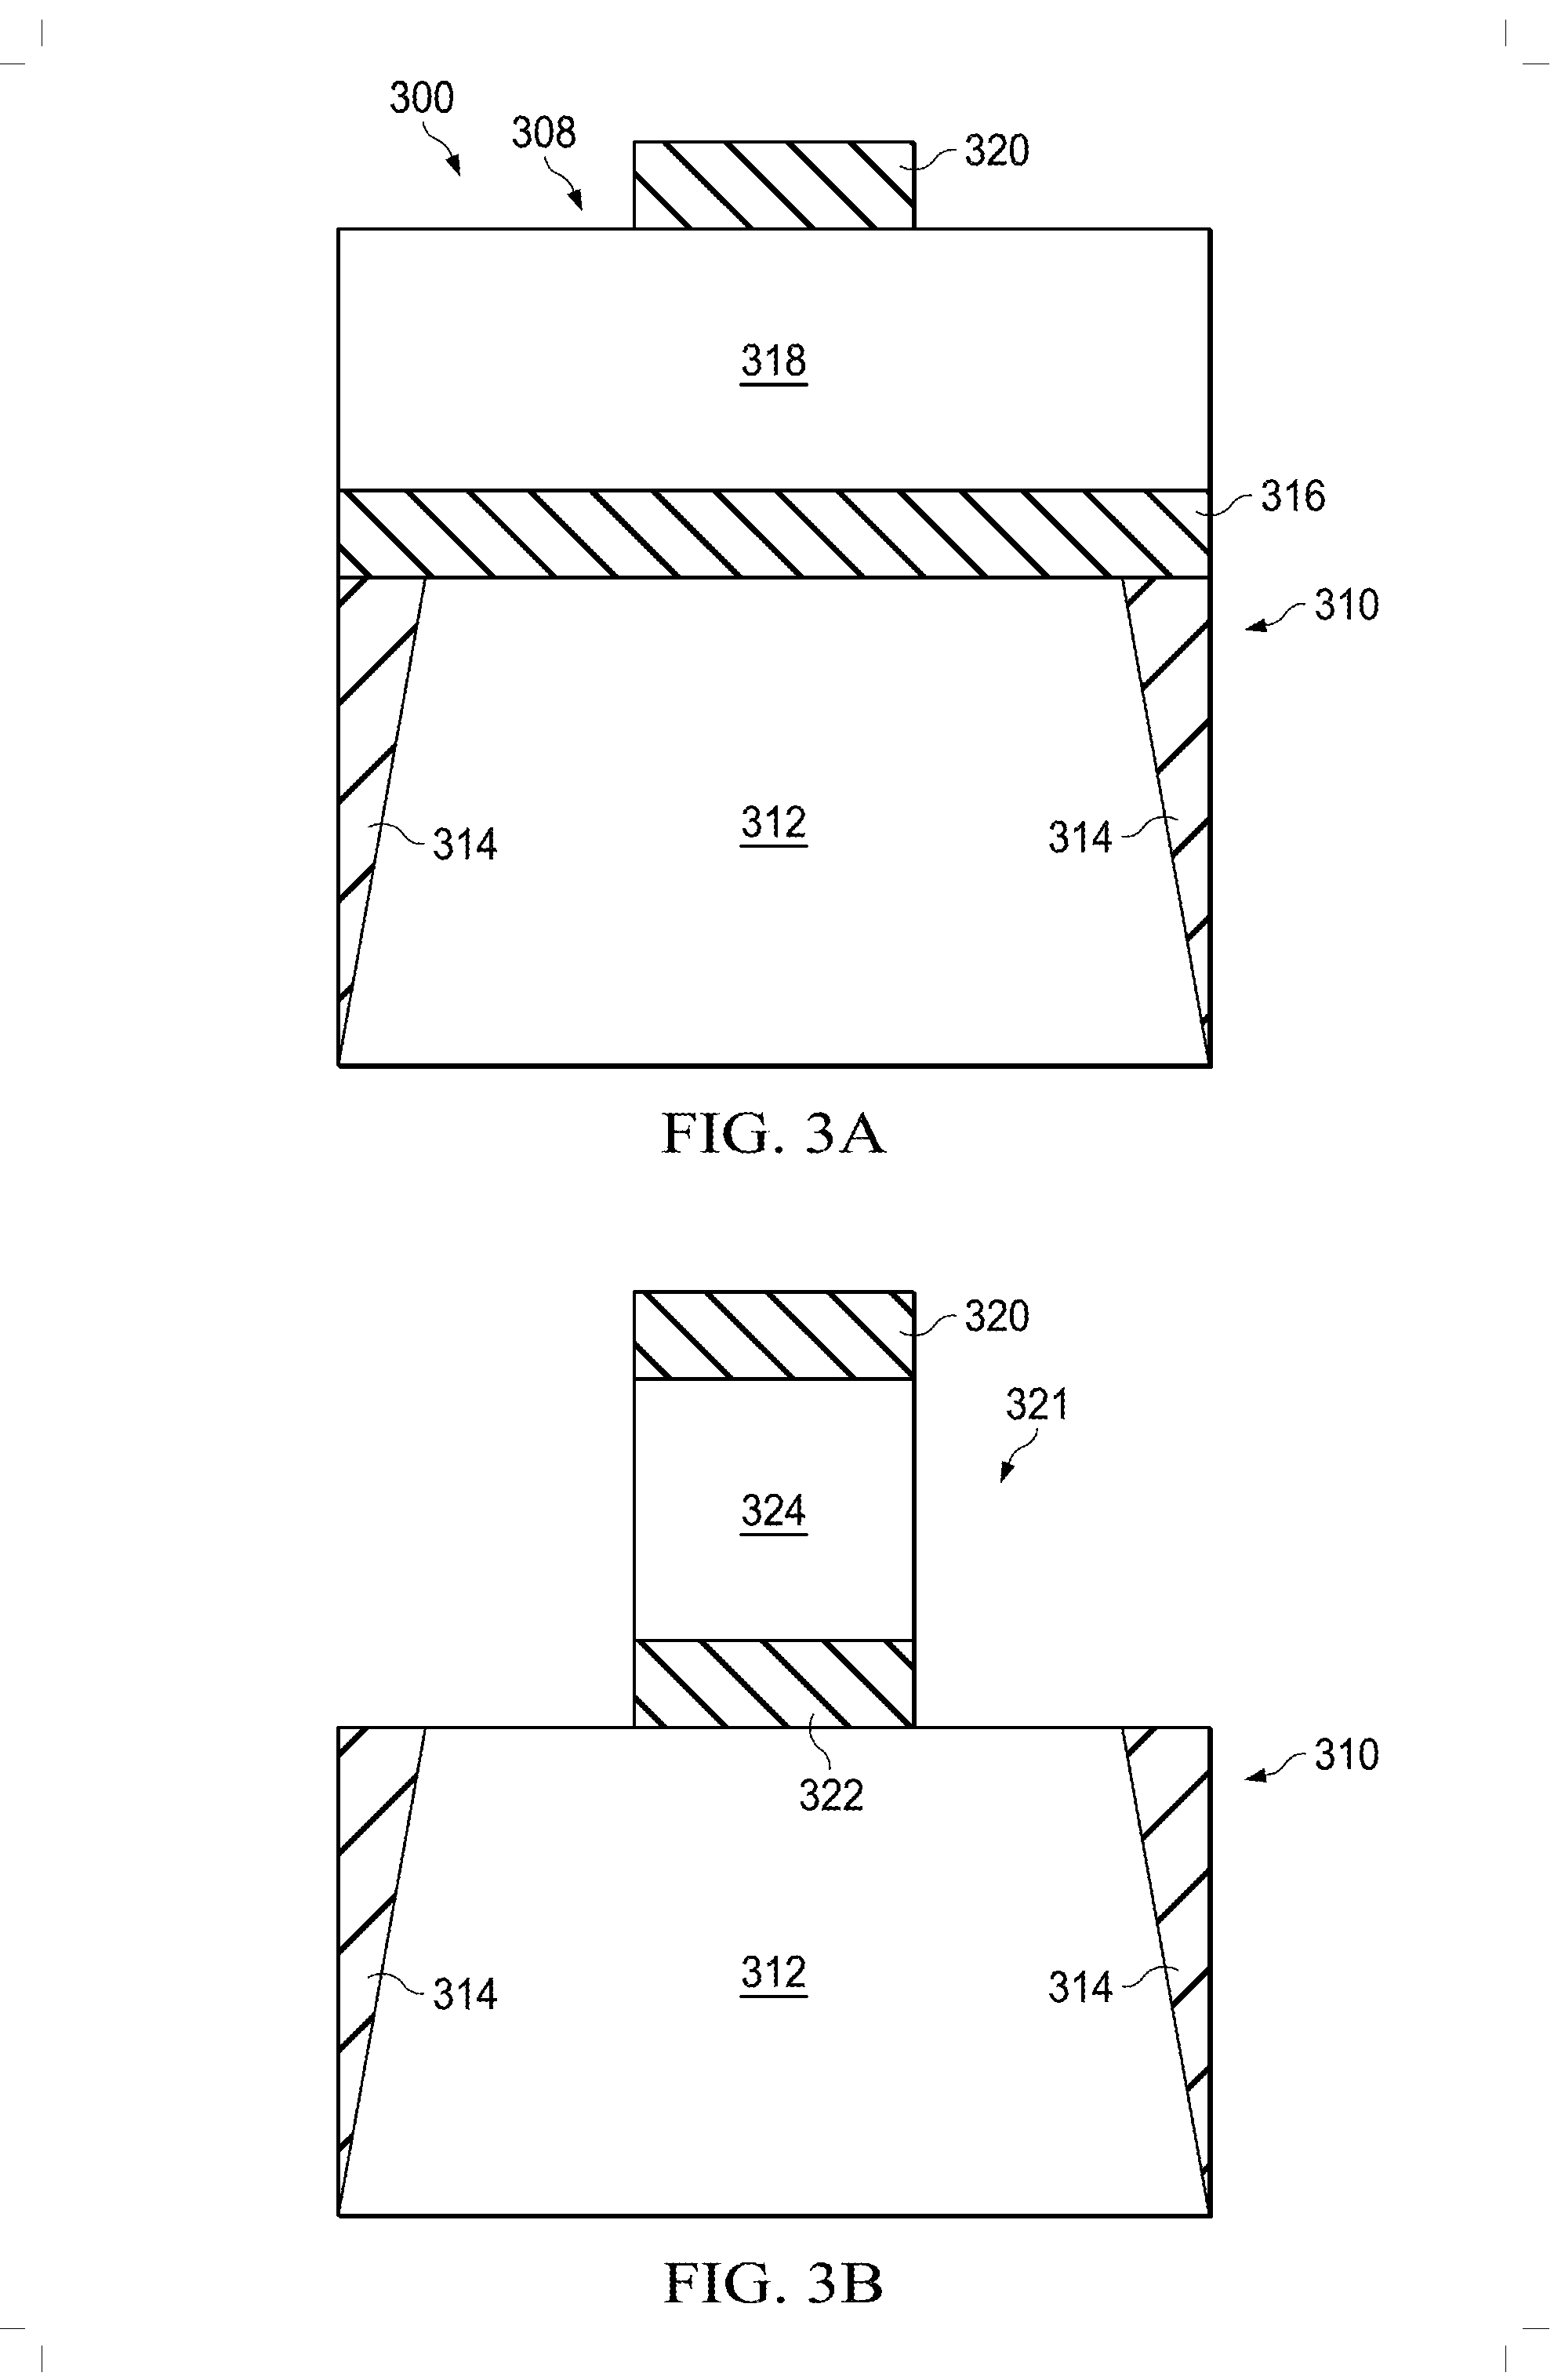 Metal-Gate MOS Transistor and Method of Forming the Transistor with Reduced Gate-to-Source and Gate-to-Drain Overlap Capacitance